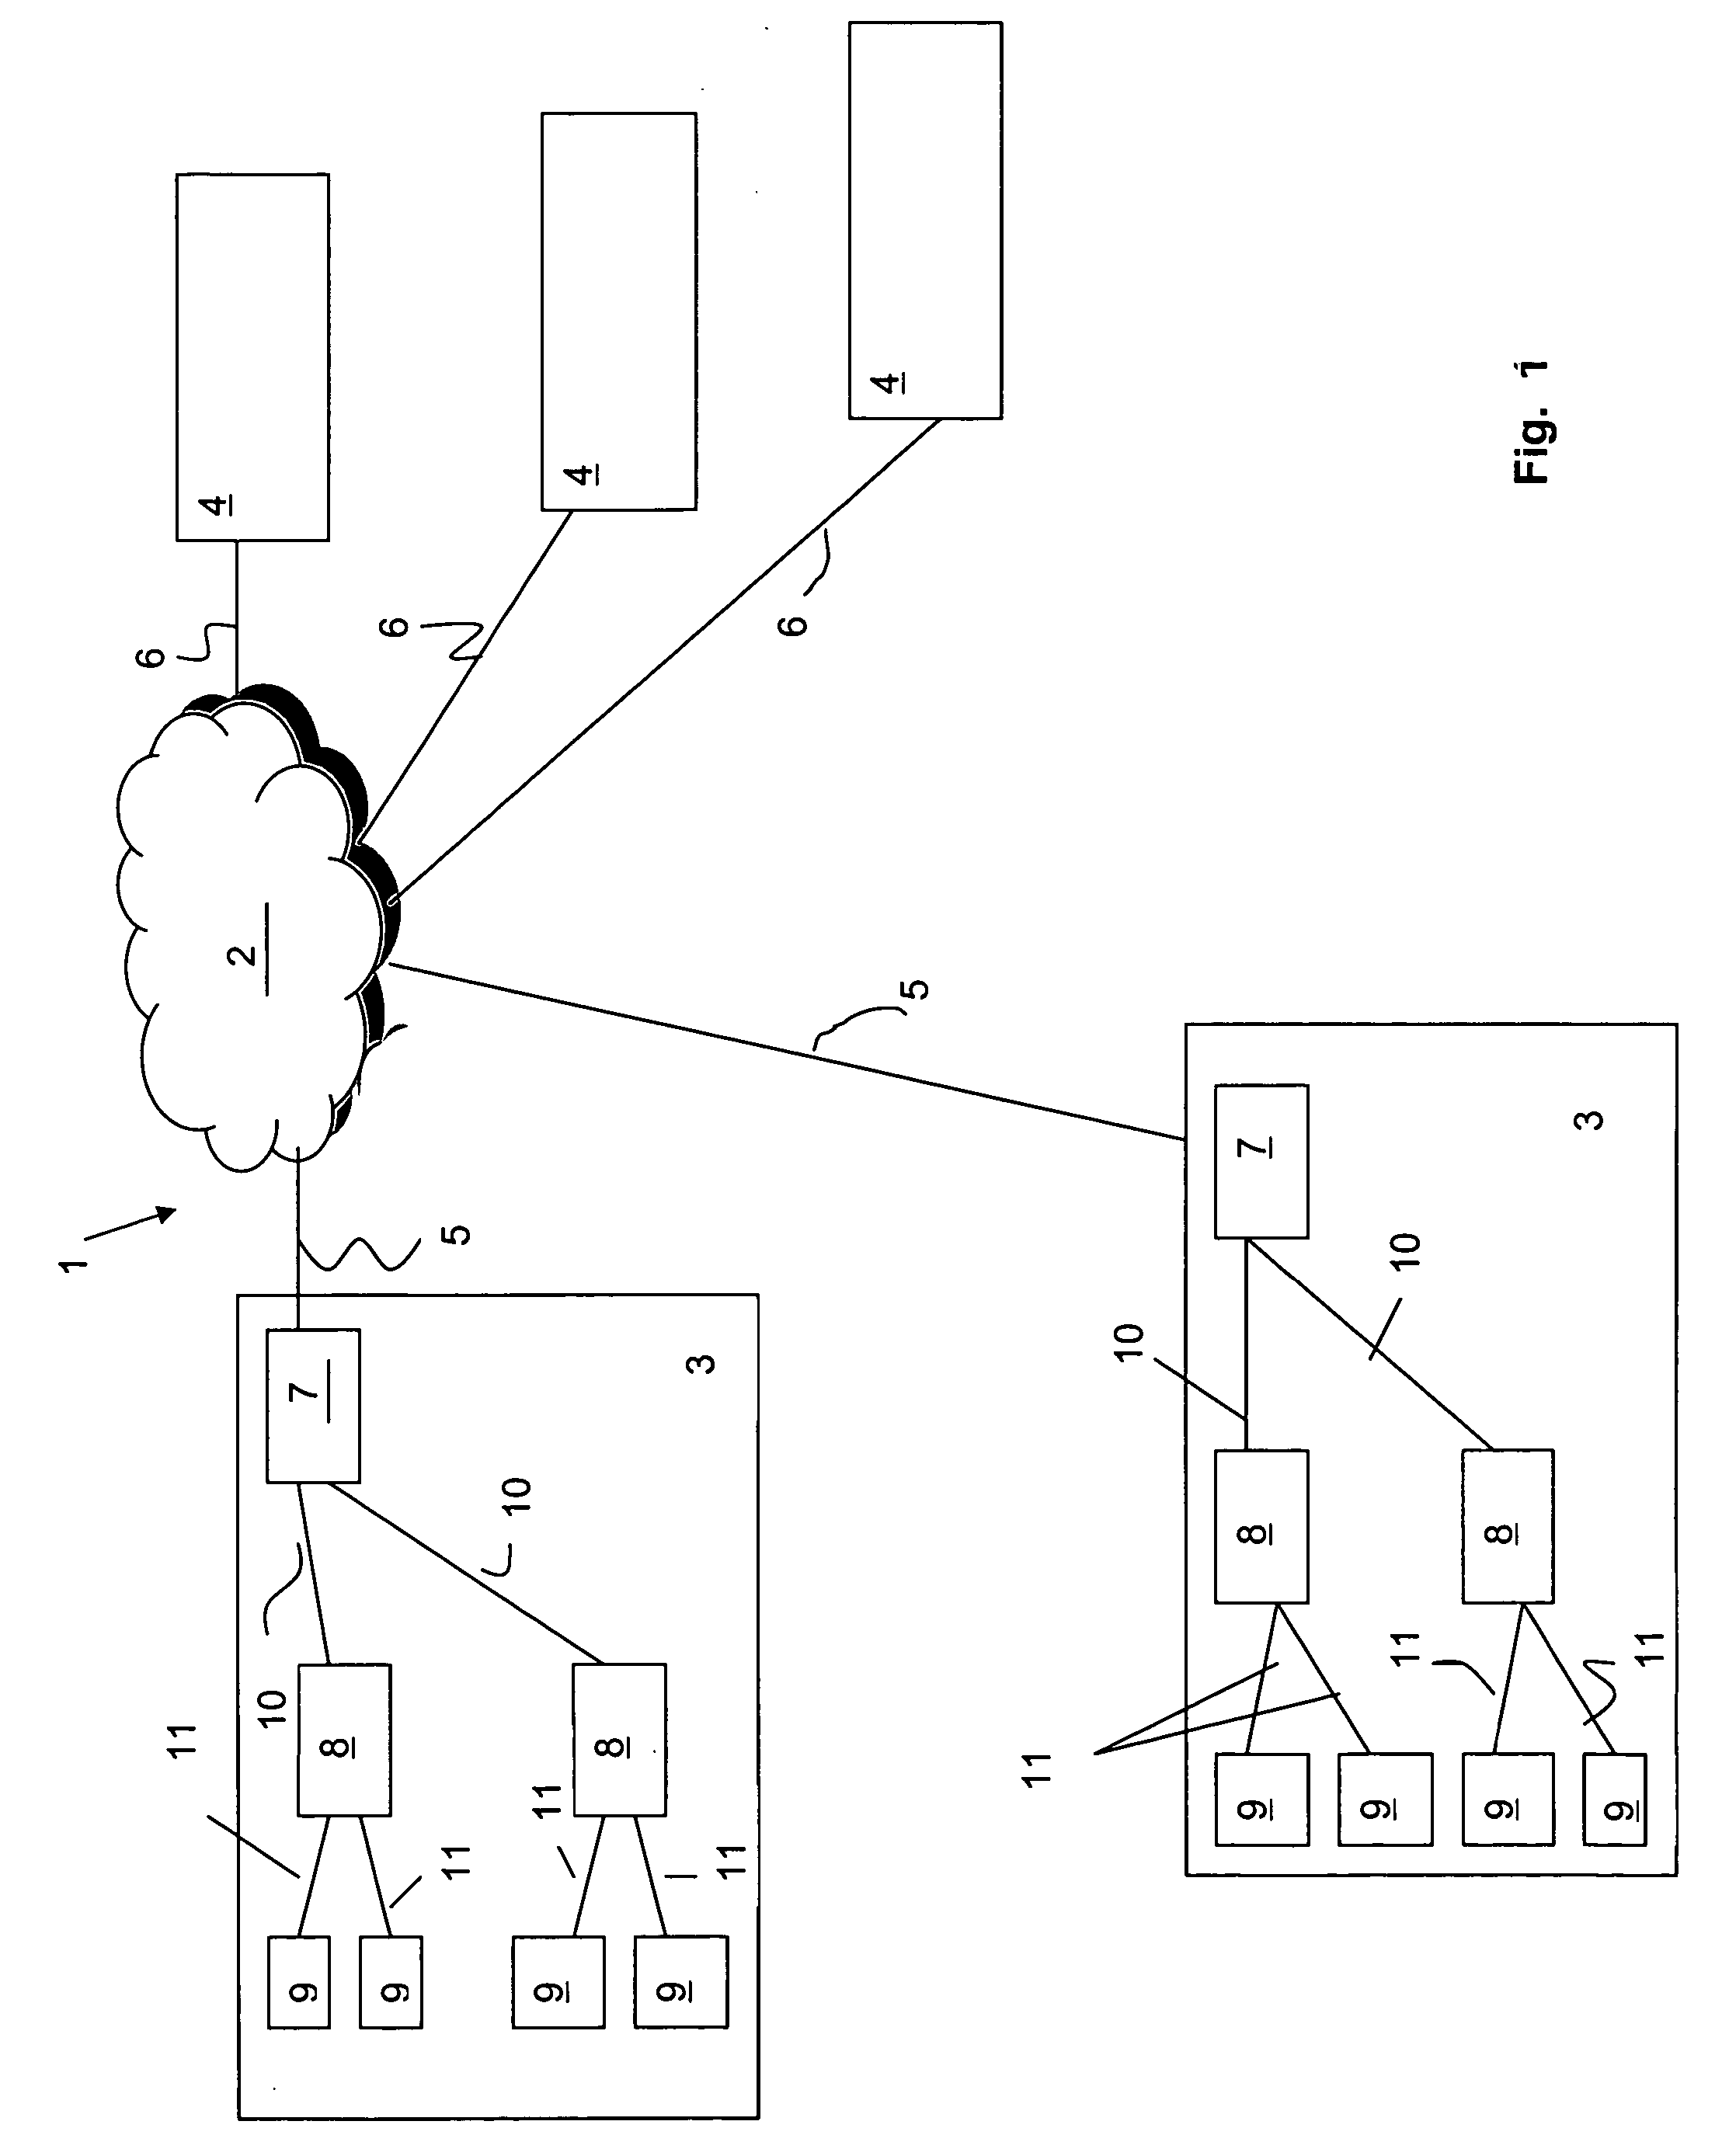 Method and apparatus for aggregating and communicating tracking information